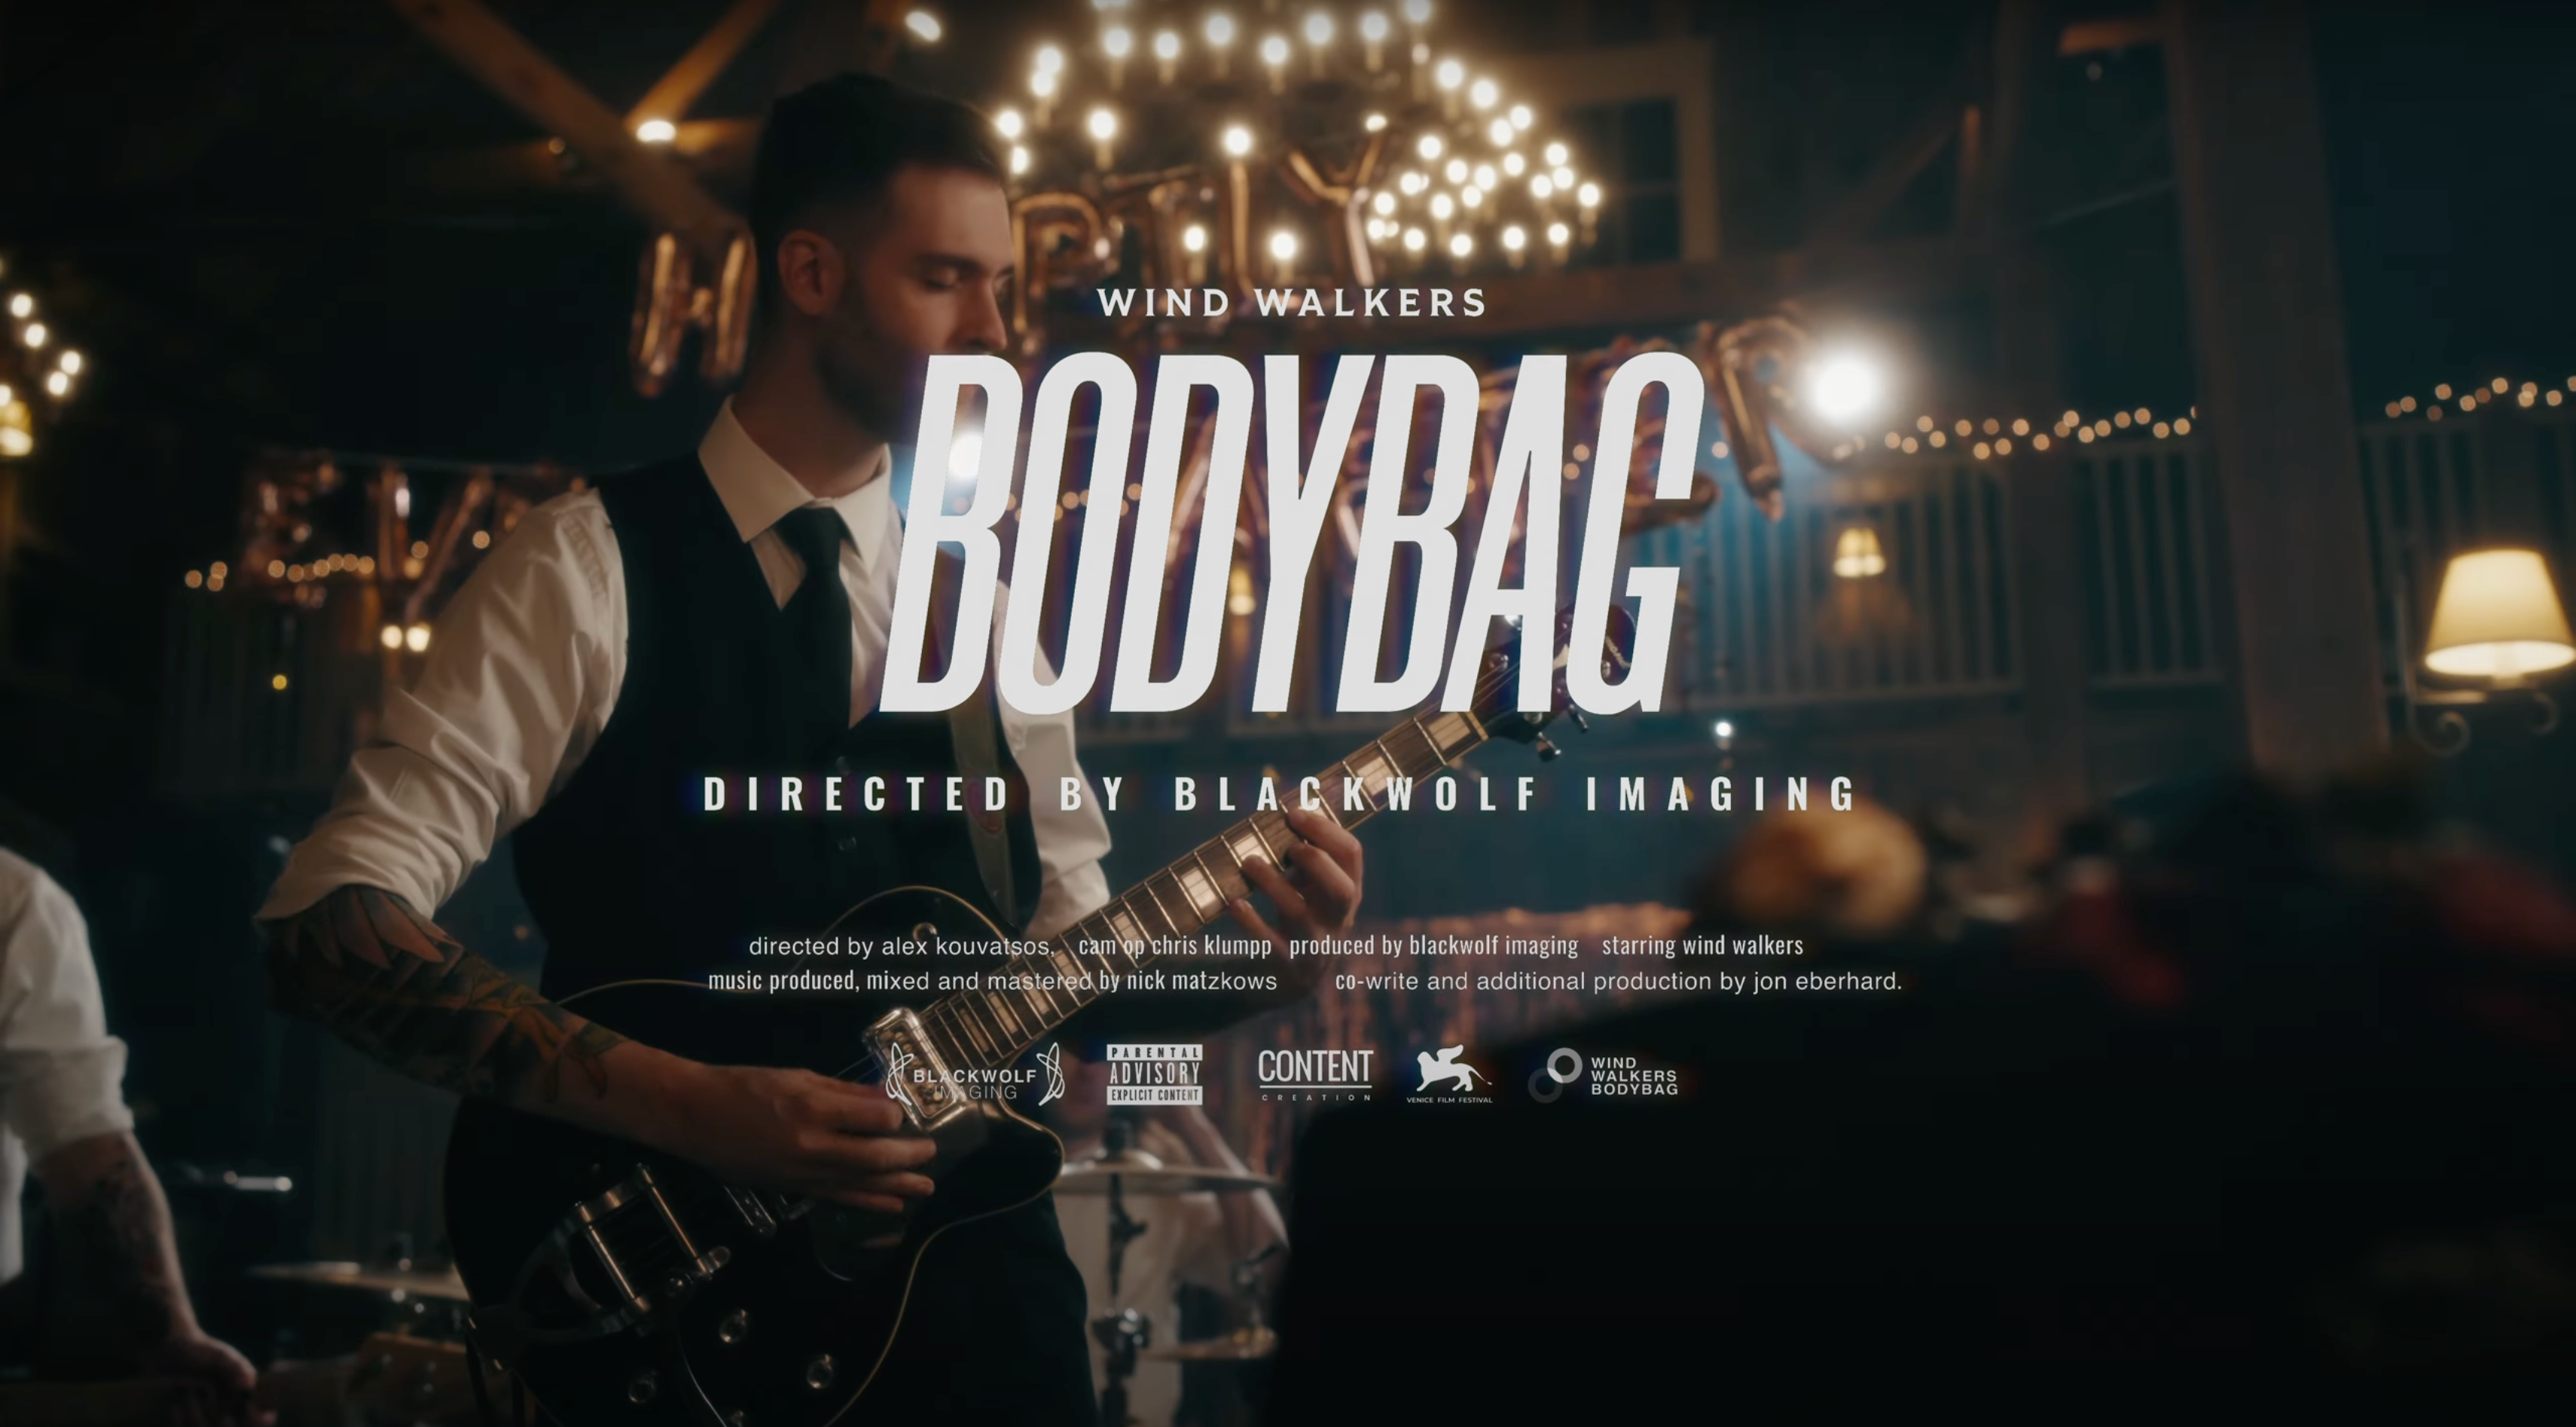 Load video: Wind Walkers music video for Bodybag